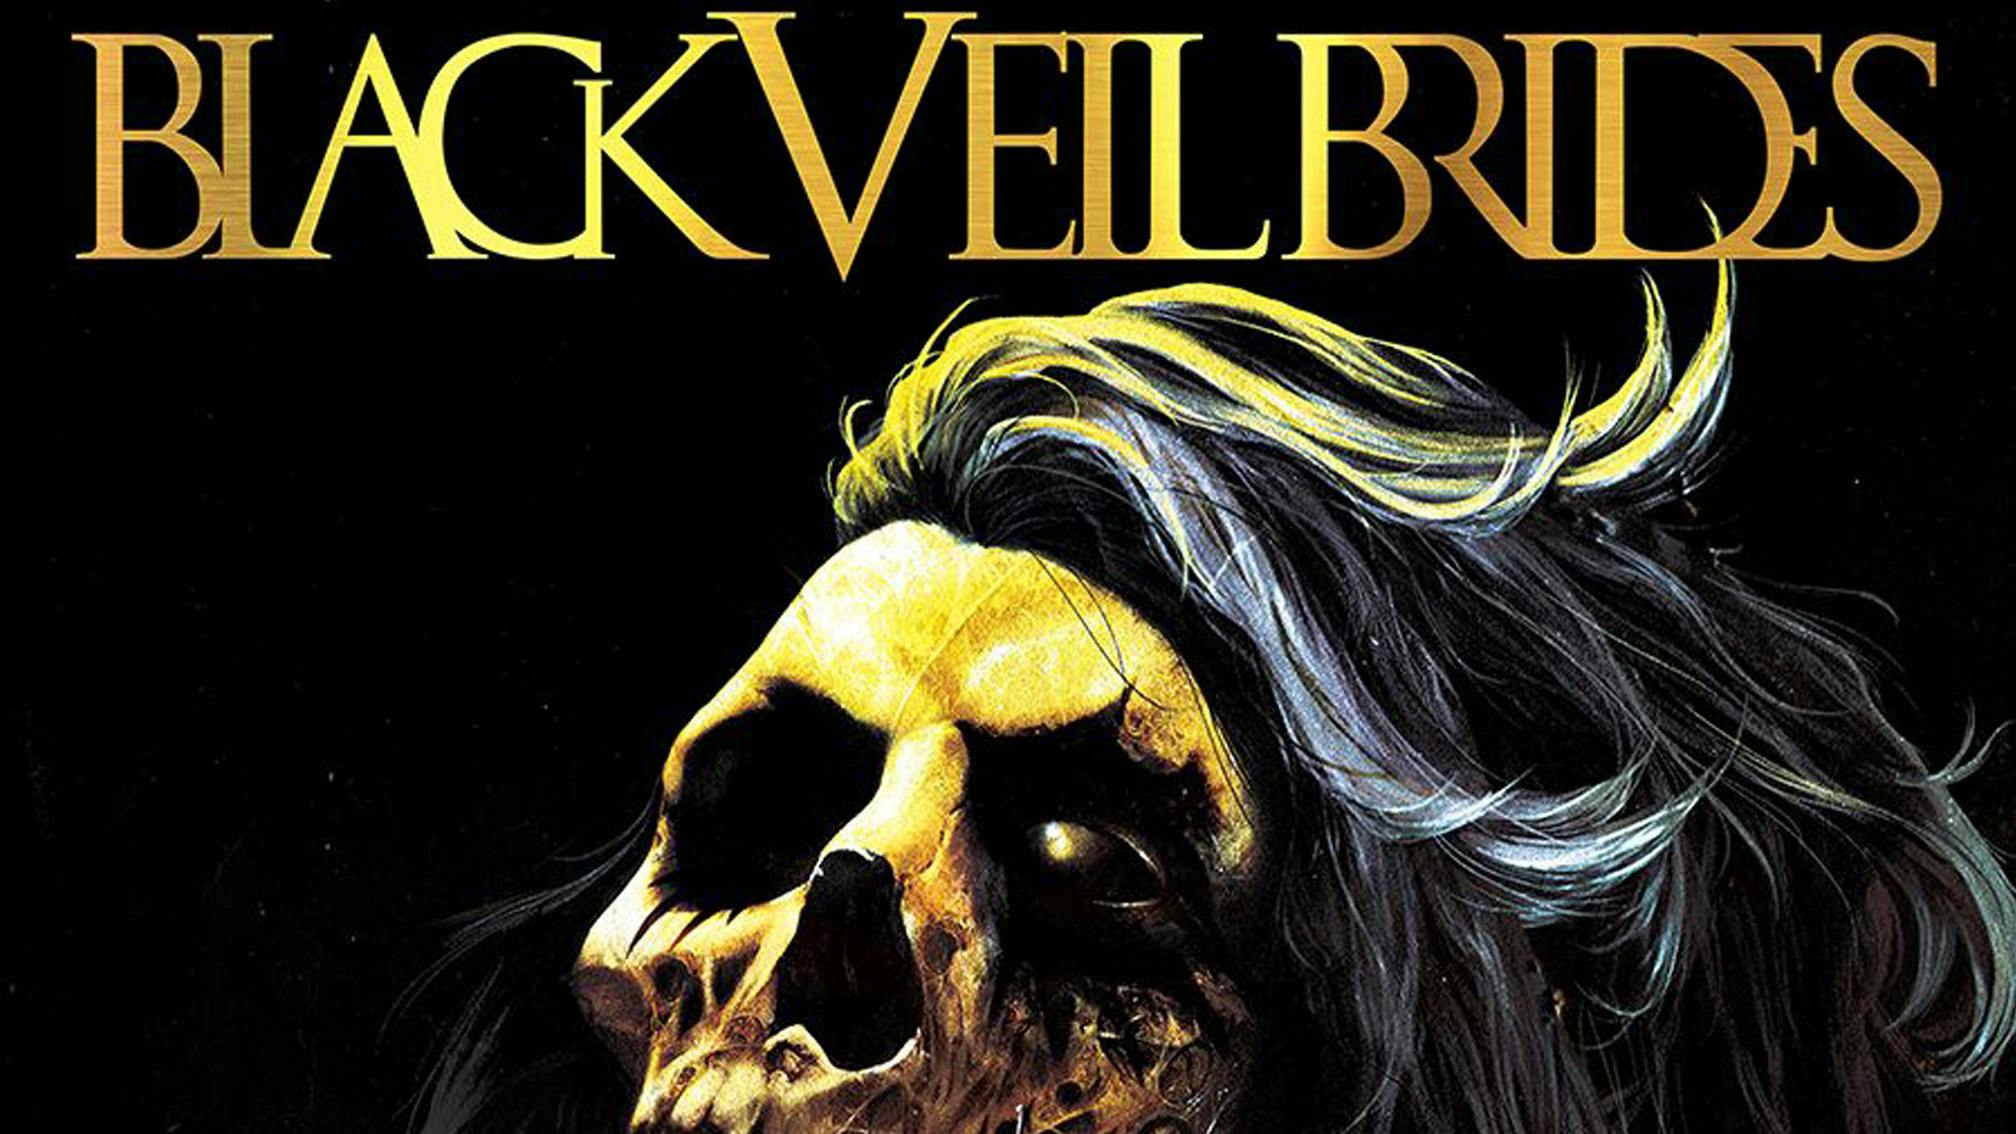 Black Veil Brides Announce Reissue Of Their Debut Album, Re-Stitch These Wounds